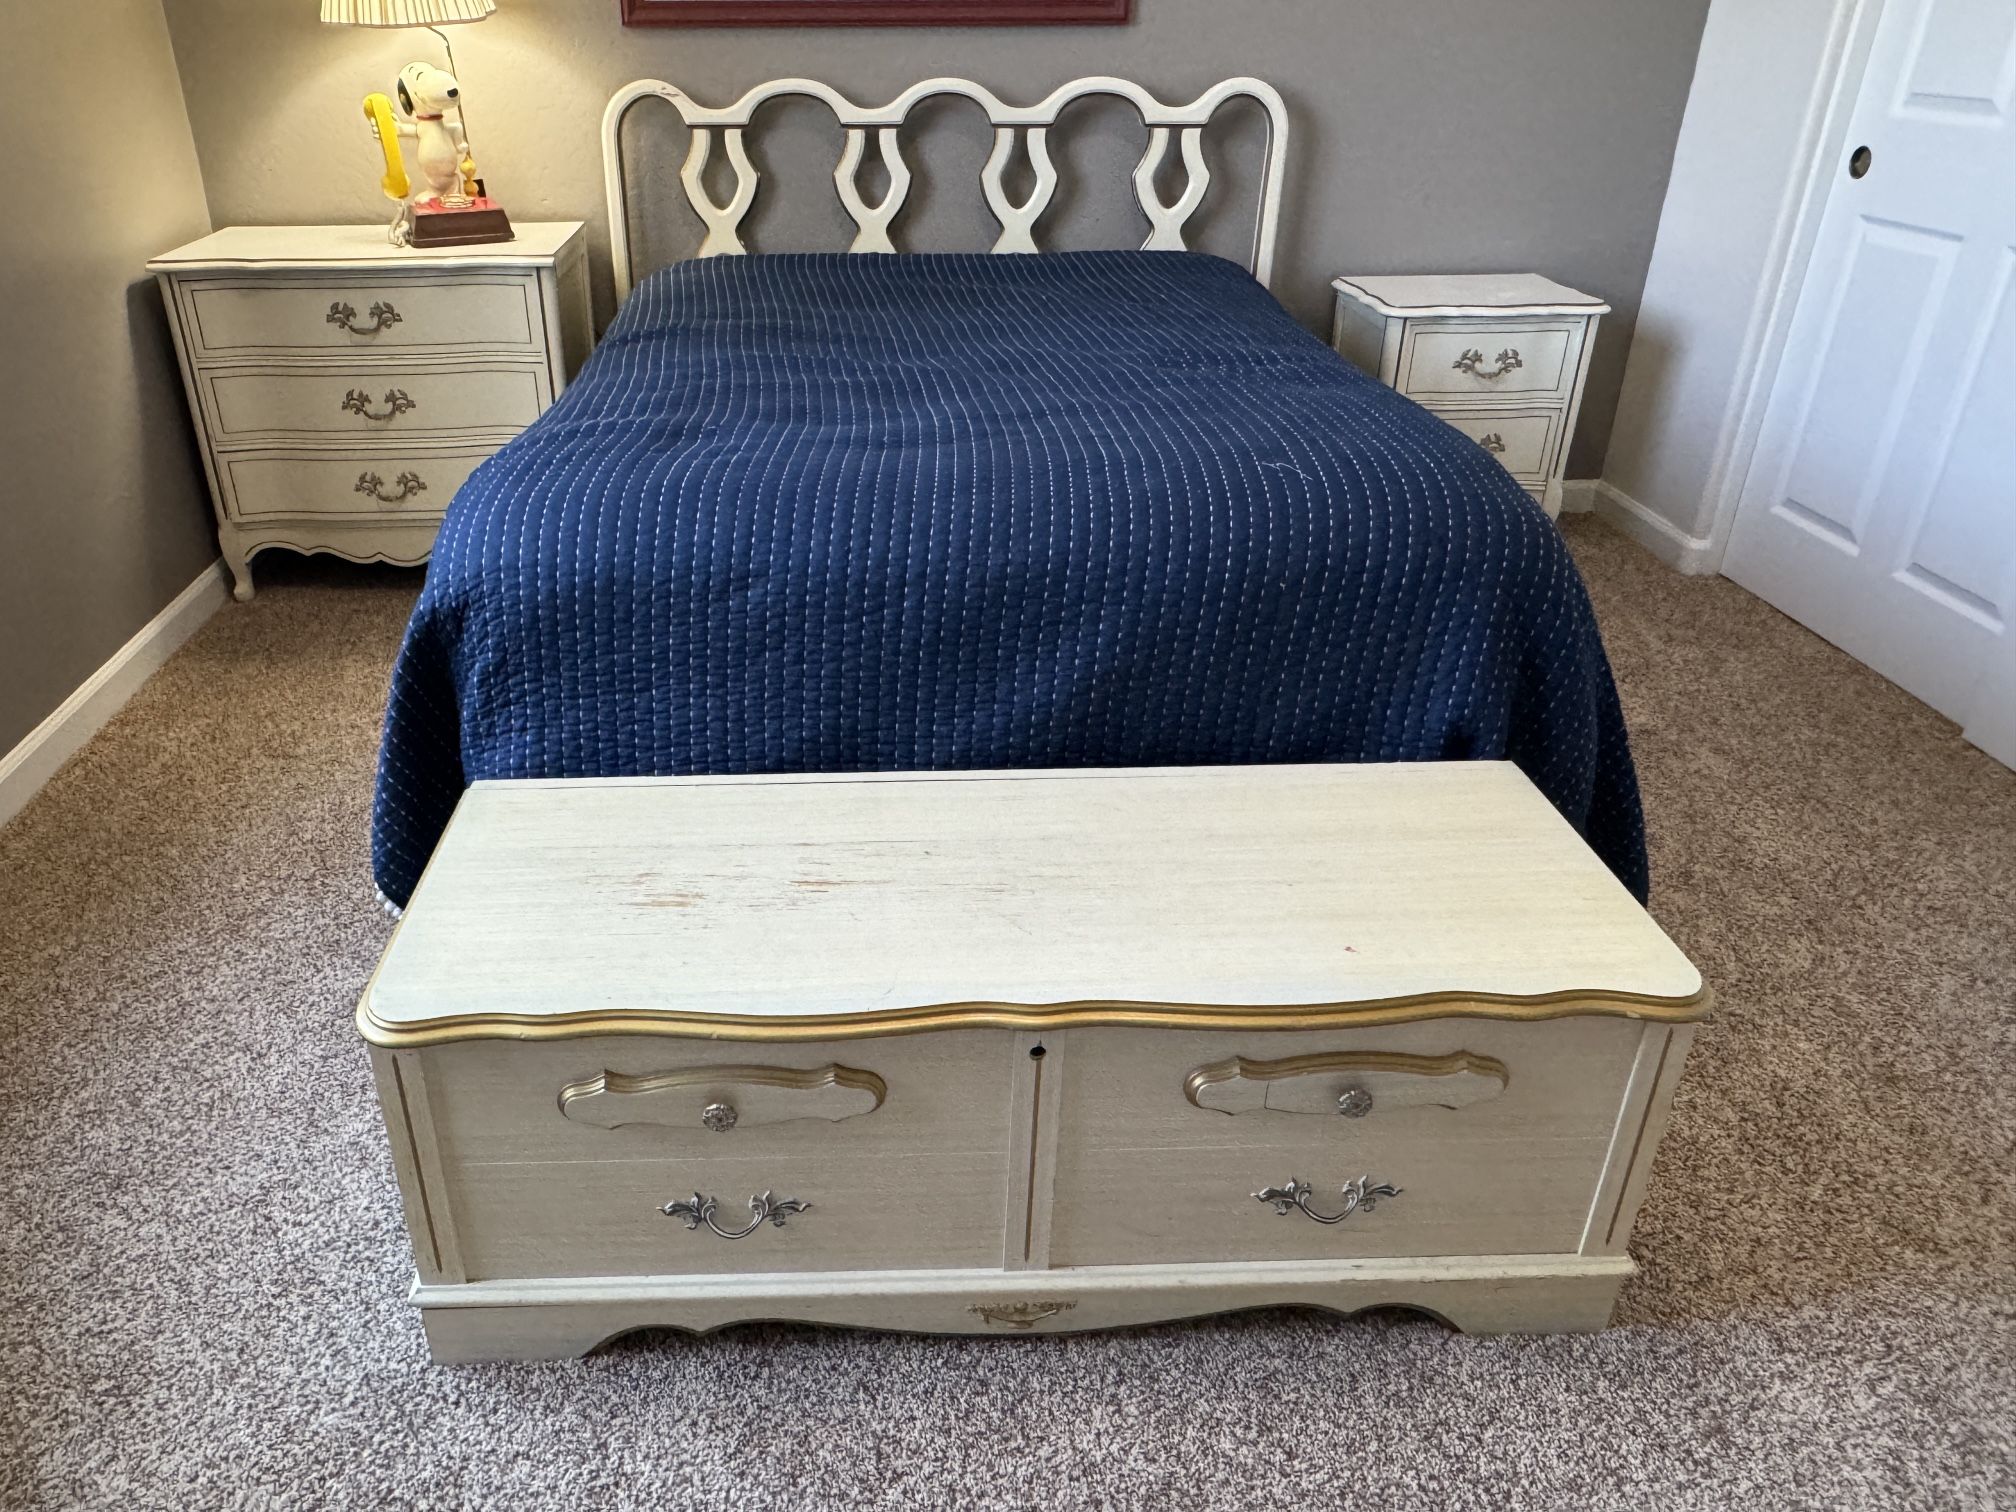 French Provincial Bedroom Set 